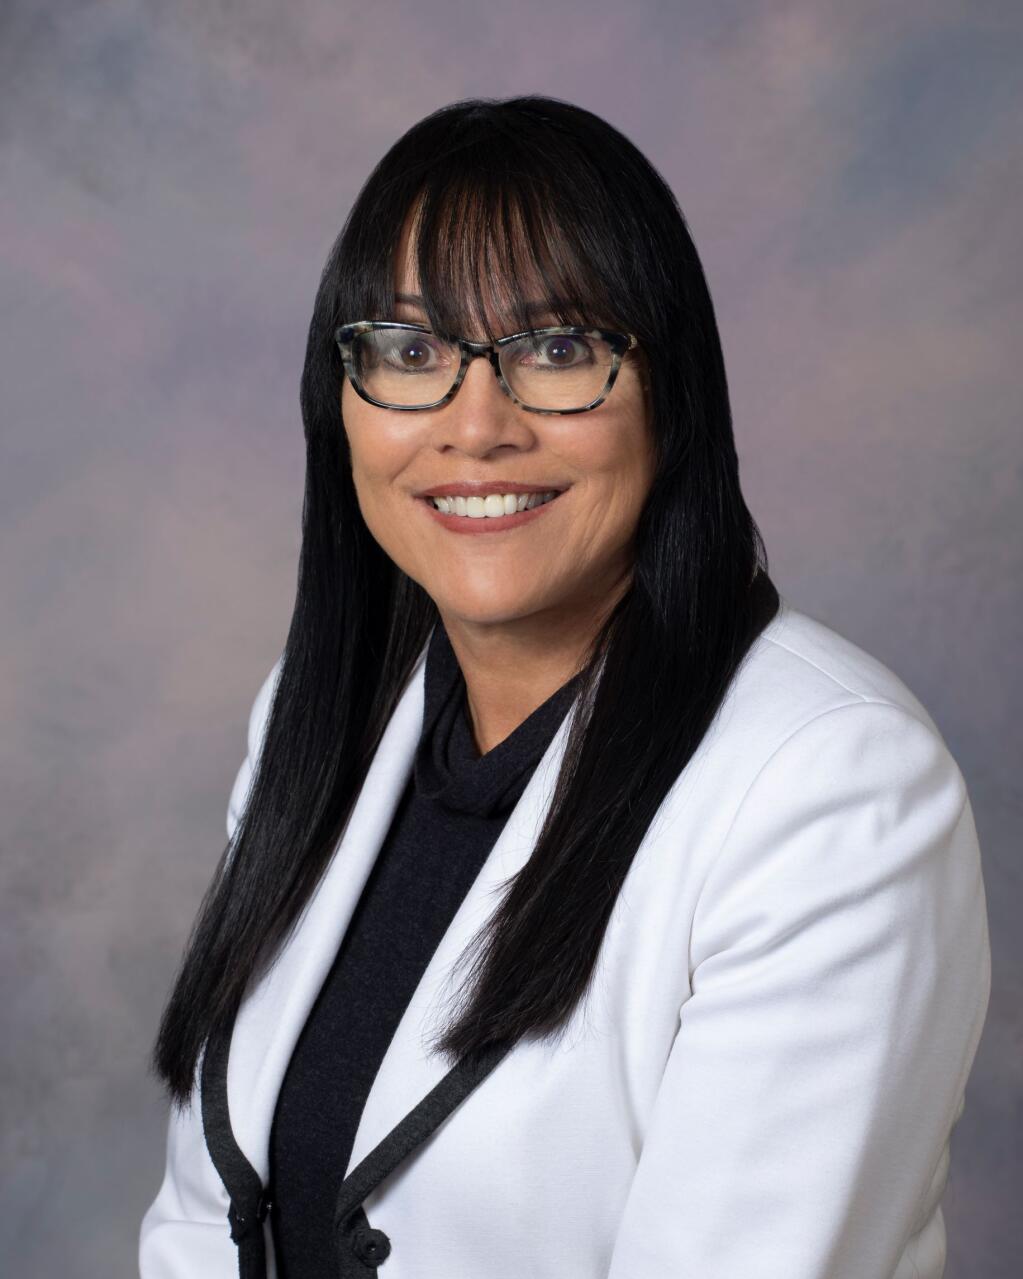 Denise M. Kalos, M.S., president and CEO of Washington-based AFFIRMATIVhealth. (courtesy of Sonoma Valley Health Care District)